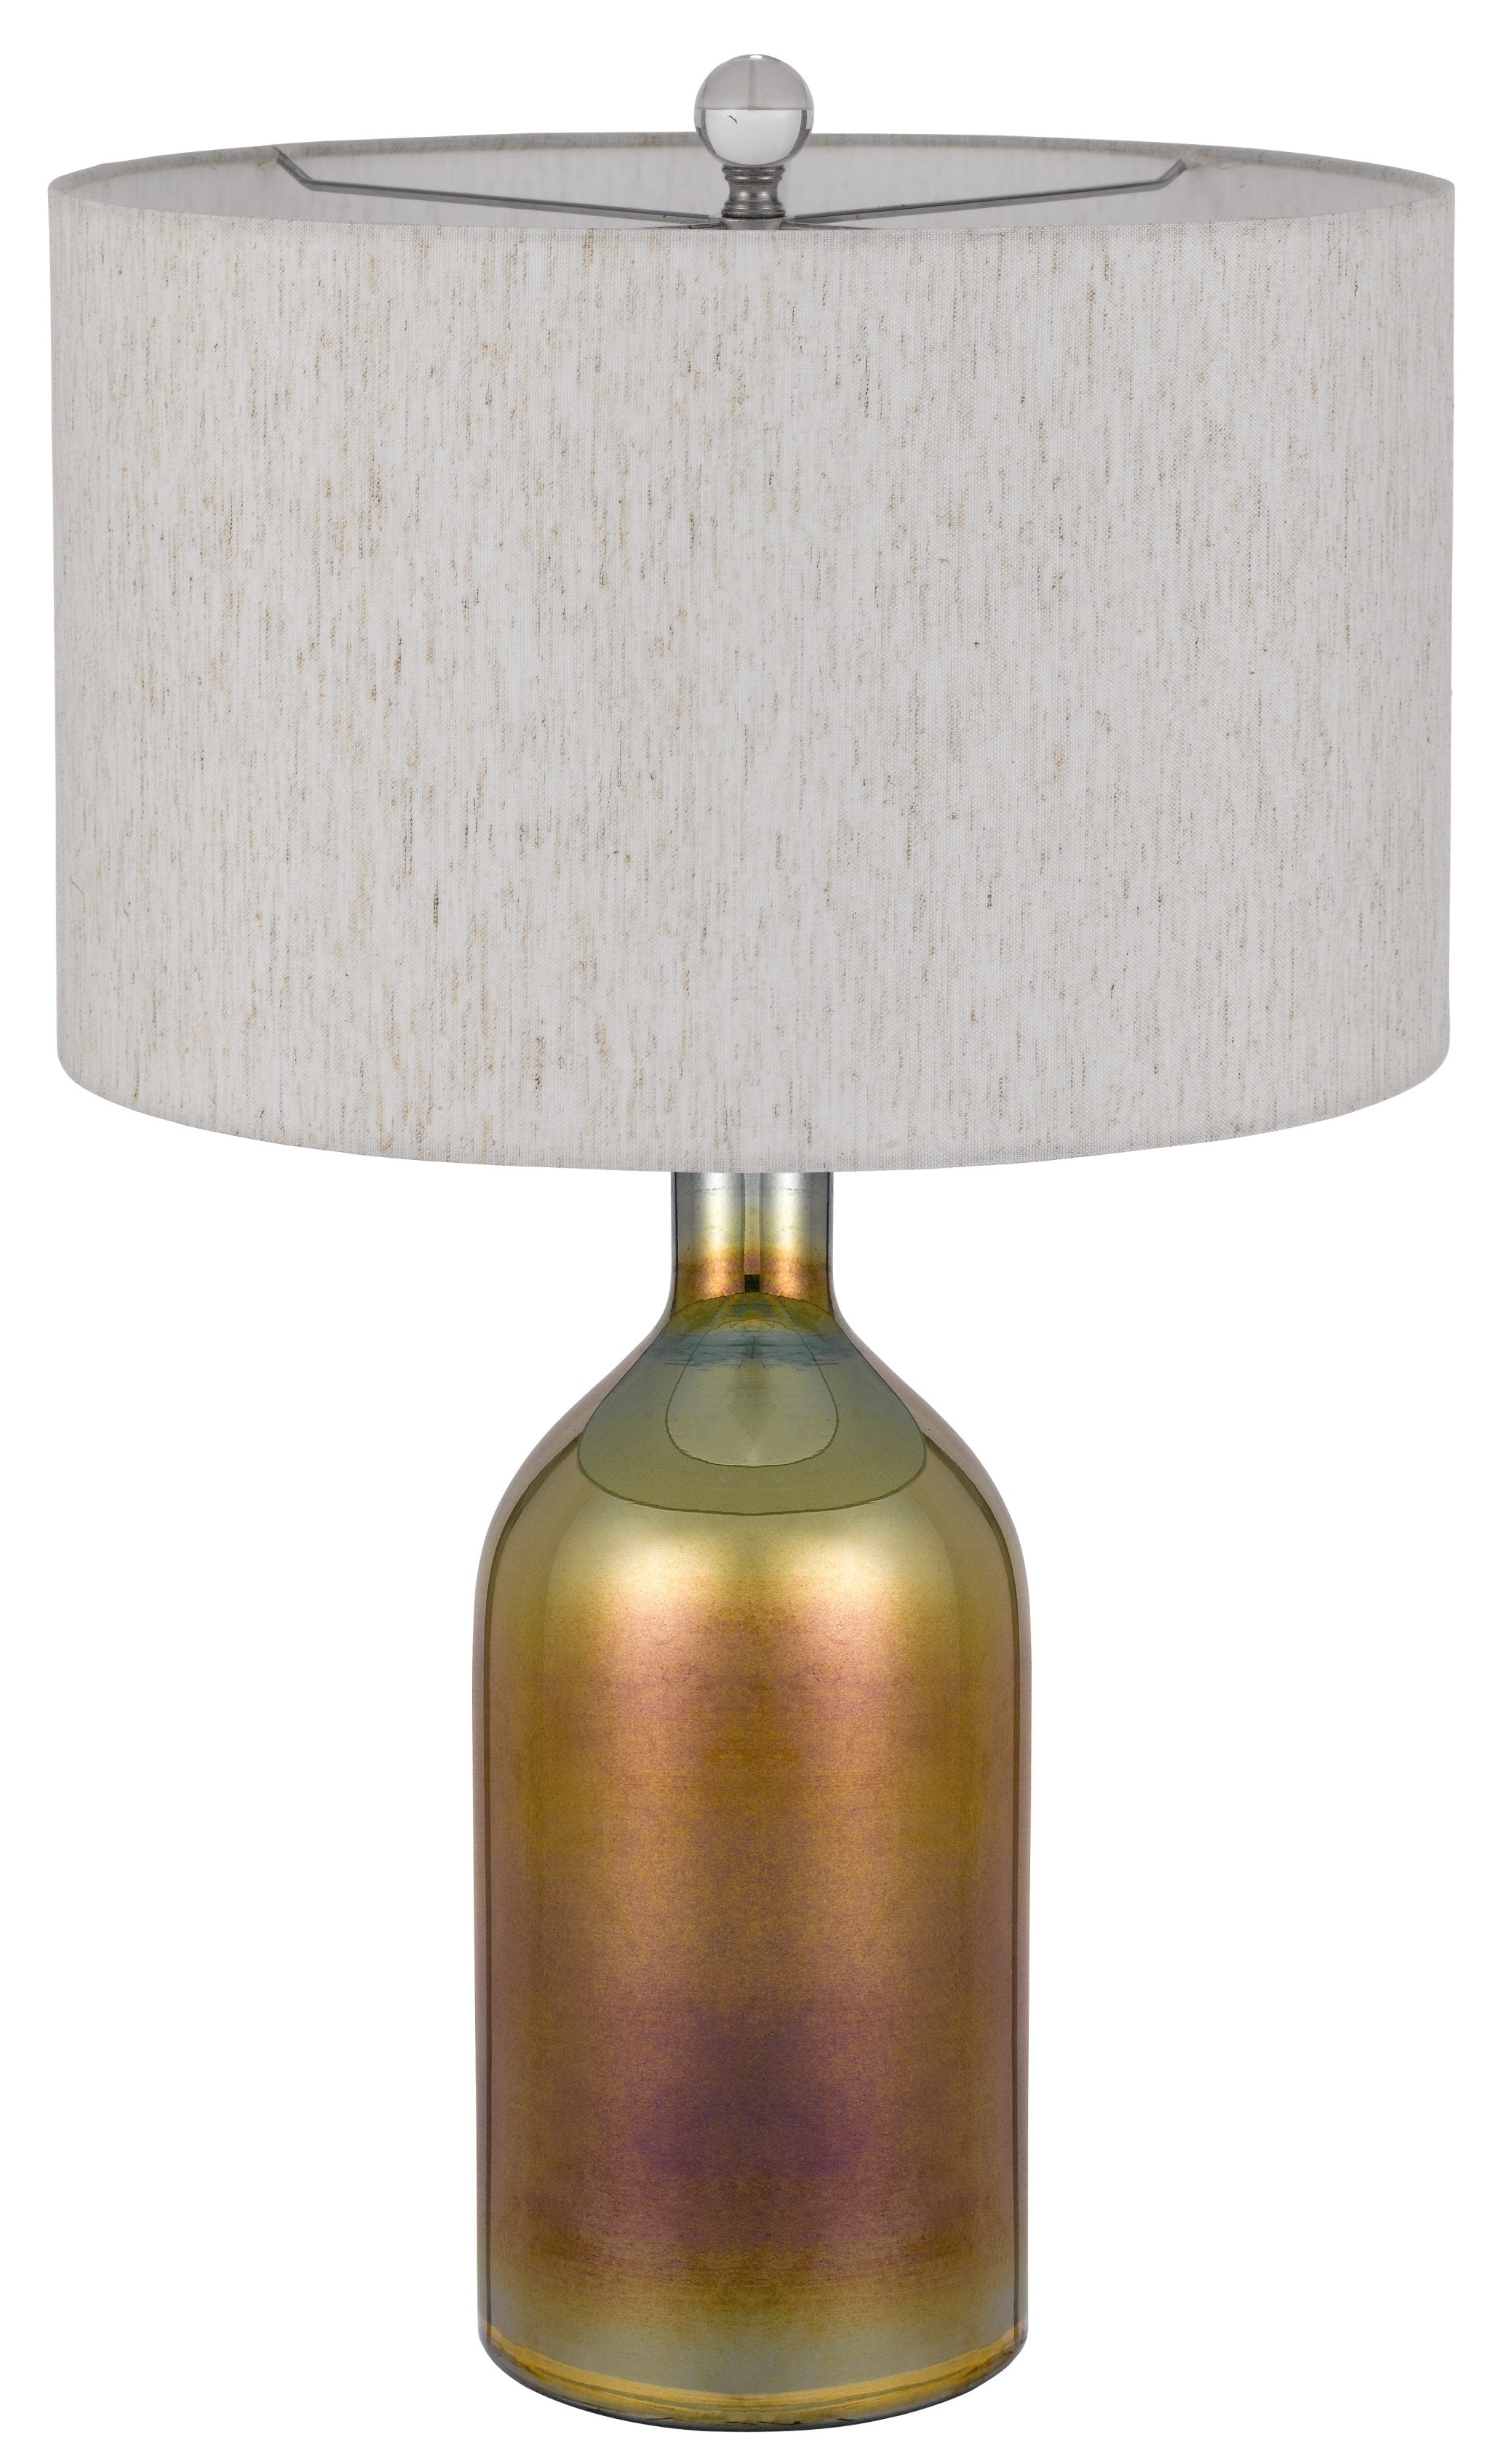 28" Gold Glass Table Lamp With Gray Drum Shade